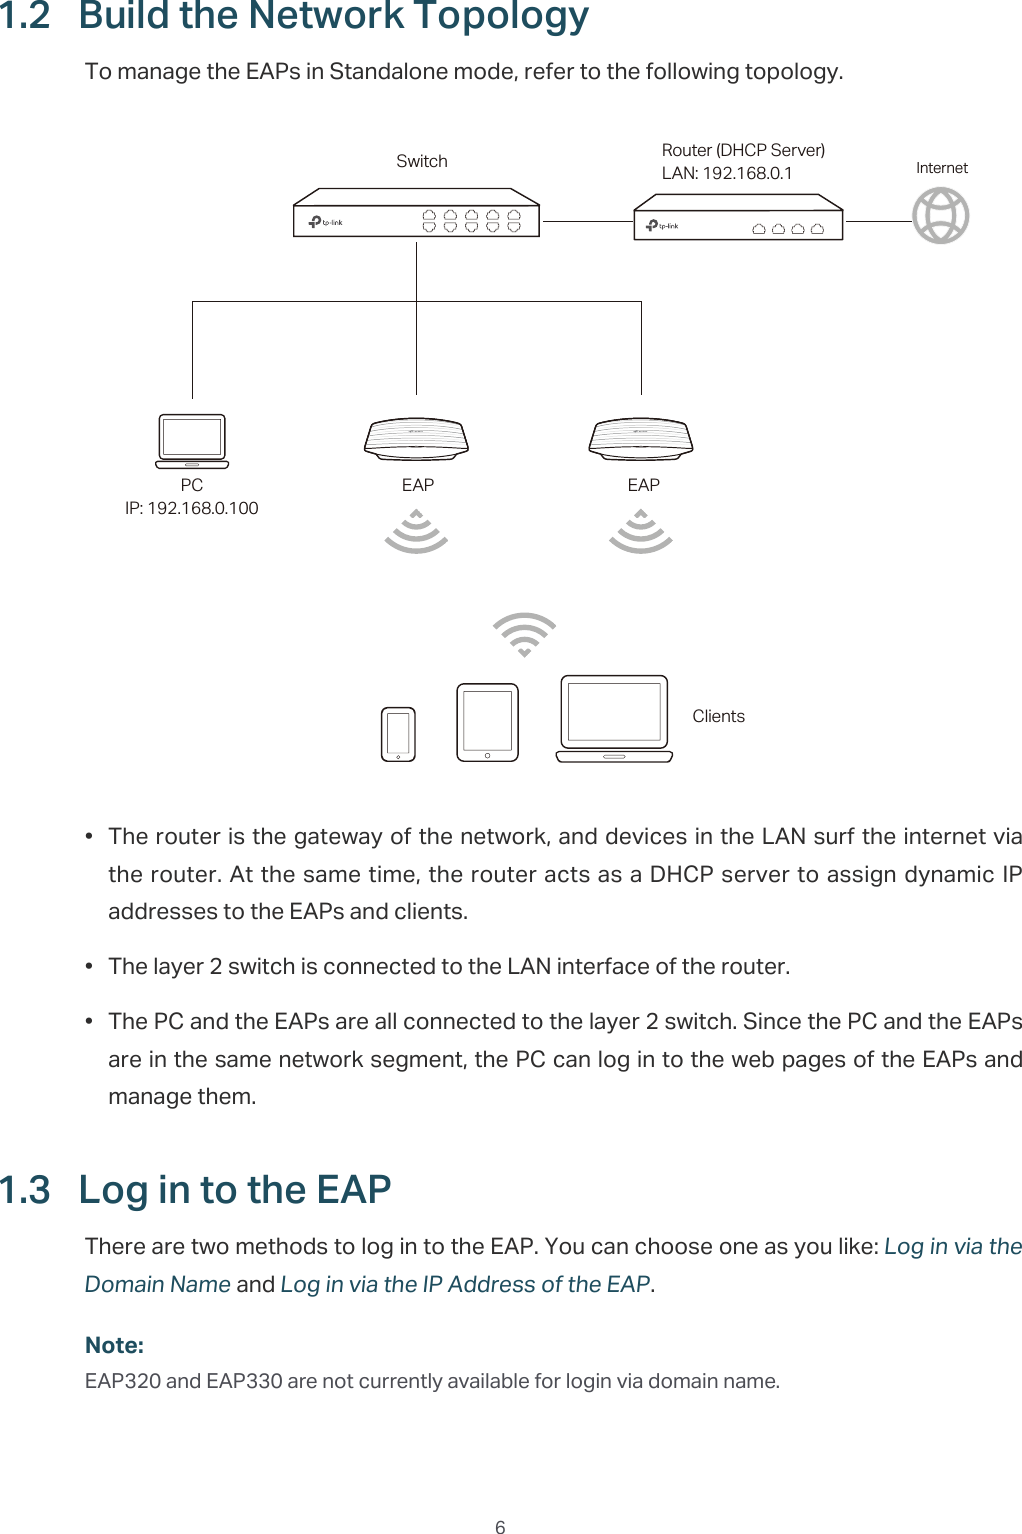  61.2  %XLOGWKH1HWZRUN7RSRORJ\To manage the EAPs in Standalone mode, refer to the following topology.EAPEAPPCIP: 192.168.0.100Switch Router (DHCP Server)LAN: 192.168.0.1 InternetClients•  The router is the gateway of the network, and devices in the LAN surf the internet via the router. At the same time, the router acts as a DHCP server to assign dynamic IP addresses to the EAPs and clients.•  The layer 2 switch is connected to the LAN interface of the router.•  The PC and the EAPs are all connected to the layer 2 switch. Since the PC and the EAPs are in the same network segment, the PC can log in to the web pages of the EAPs and manage them.1.3  /RJLQWRWKH($3There are two methods to log in to the EAP. You can choose one as you like: Log in via the Domain Name and Log in via the IP Address of the EAP.Note:EAP320 and EAP330 are not currently available for login via domain name.